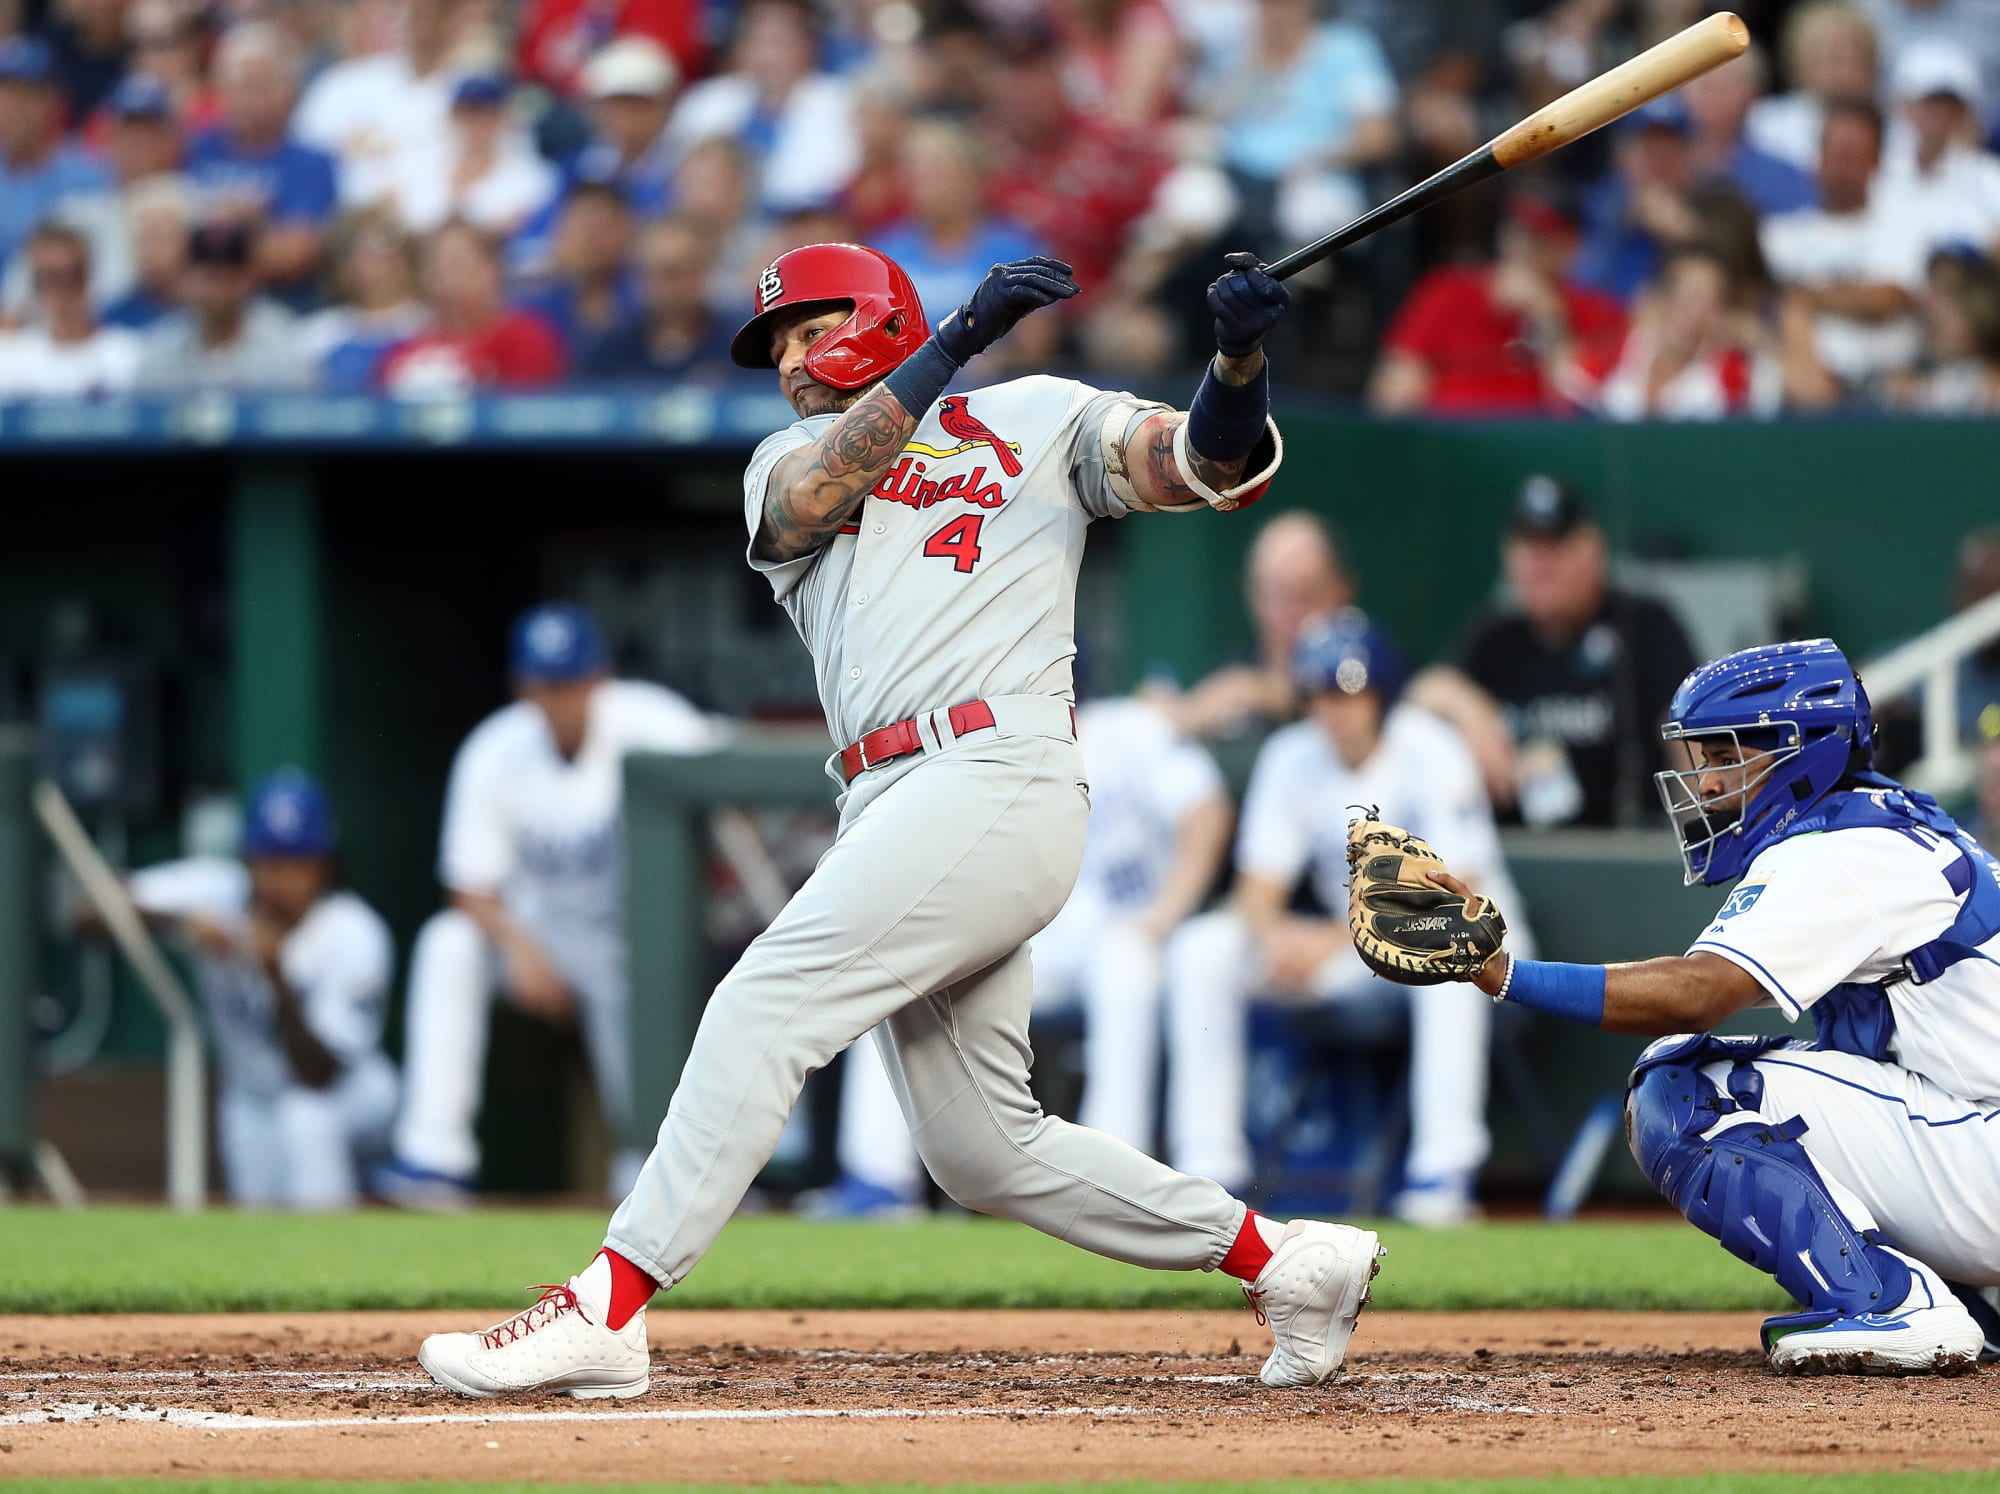 Could these be their last games as a St. Louis Cardinals Player? - Page 2